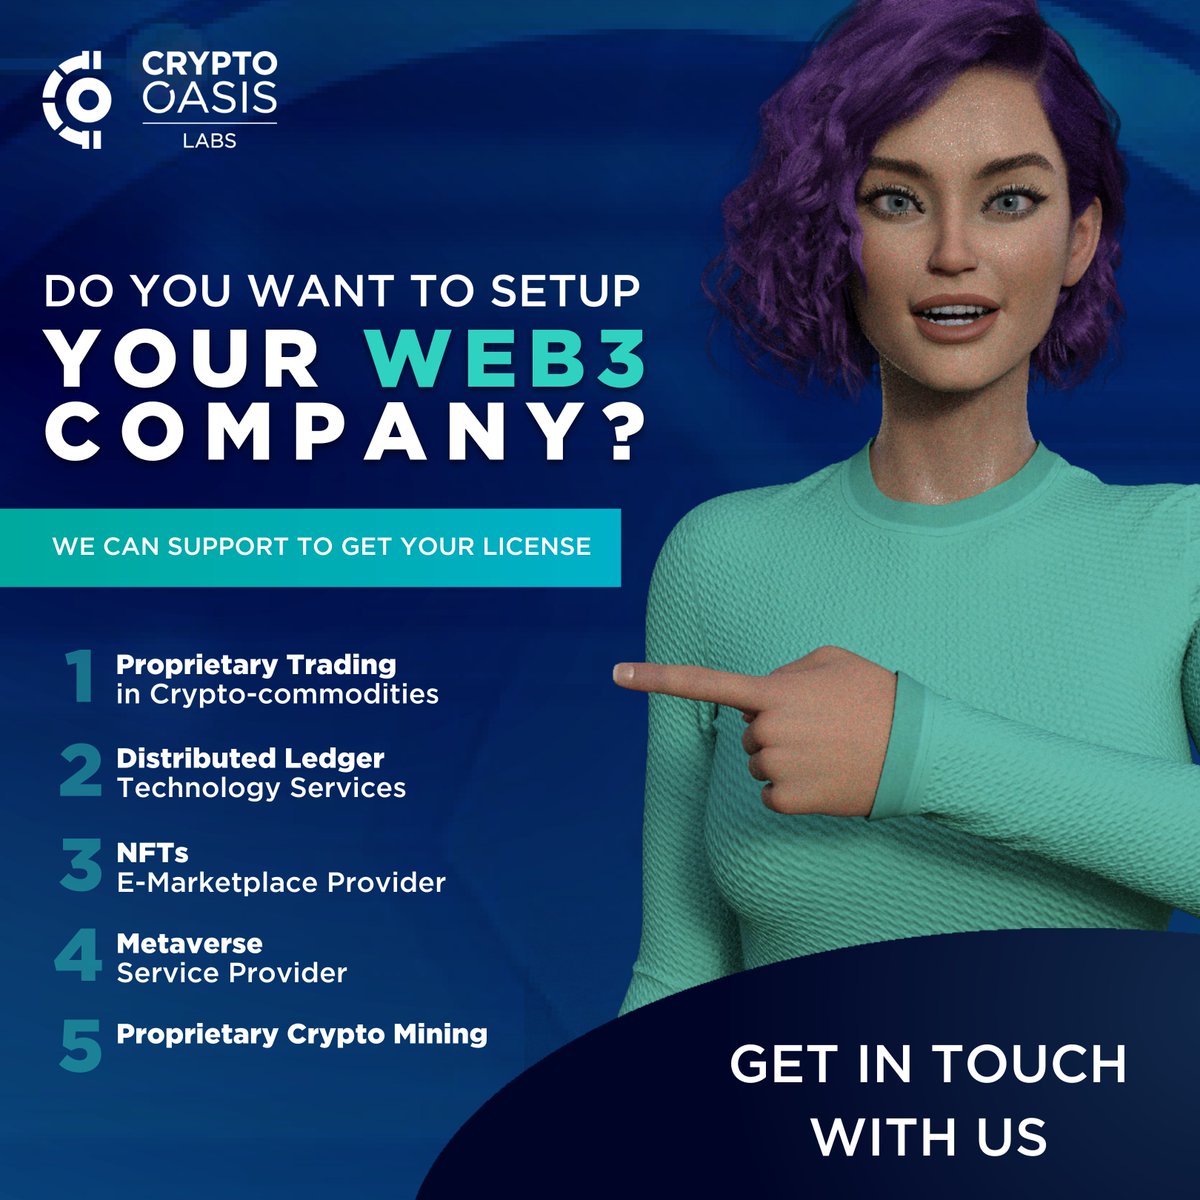 Ready to take your Web3 business to the next level? Let us help you with the setup process! Contact us now to get started!

👉 cosetup.ae

#CryptoOasis #arteCommunity #Web3 #Blockchain #Metaverse #NFT #DLT #ProprietaryTrading